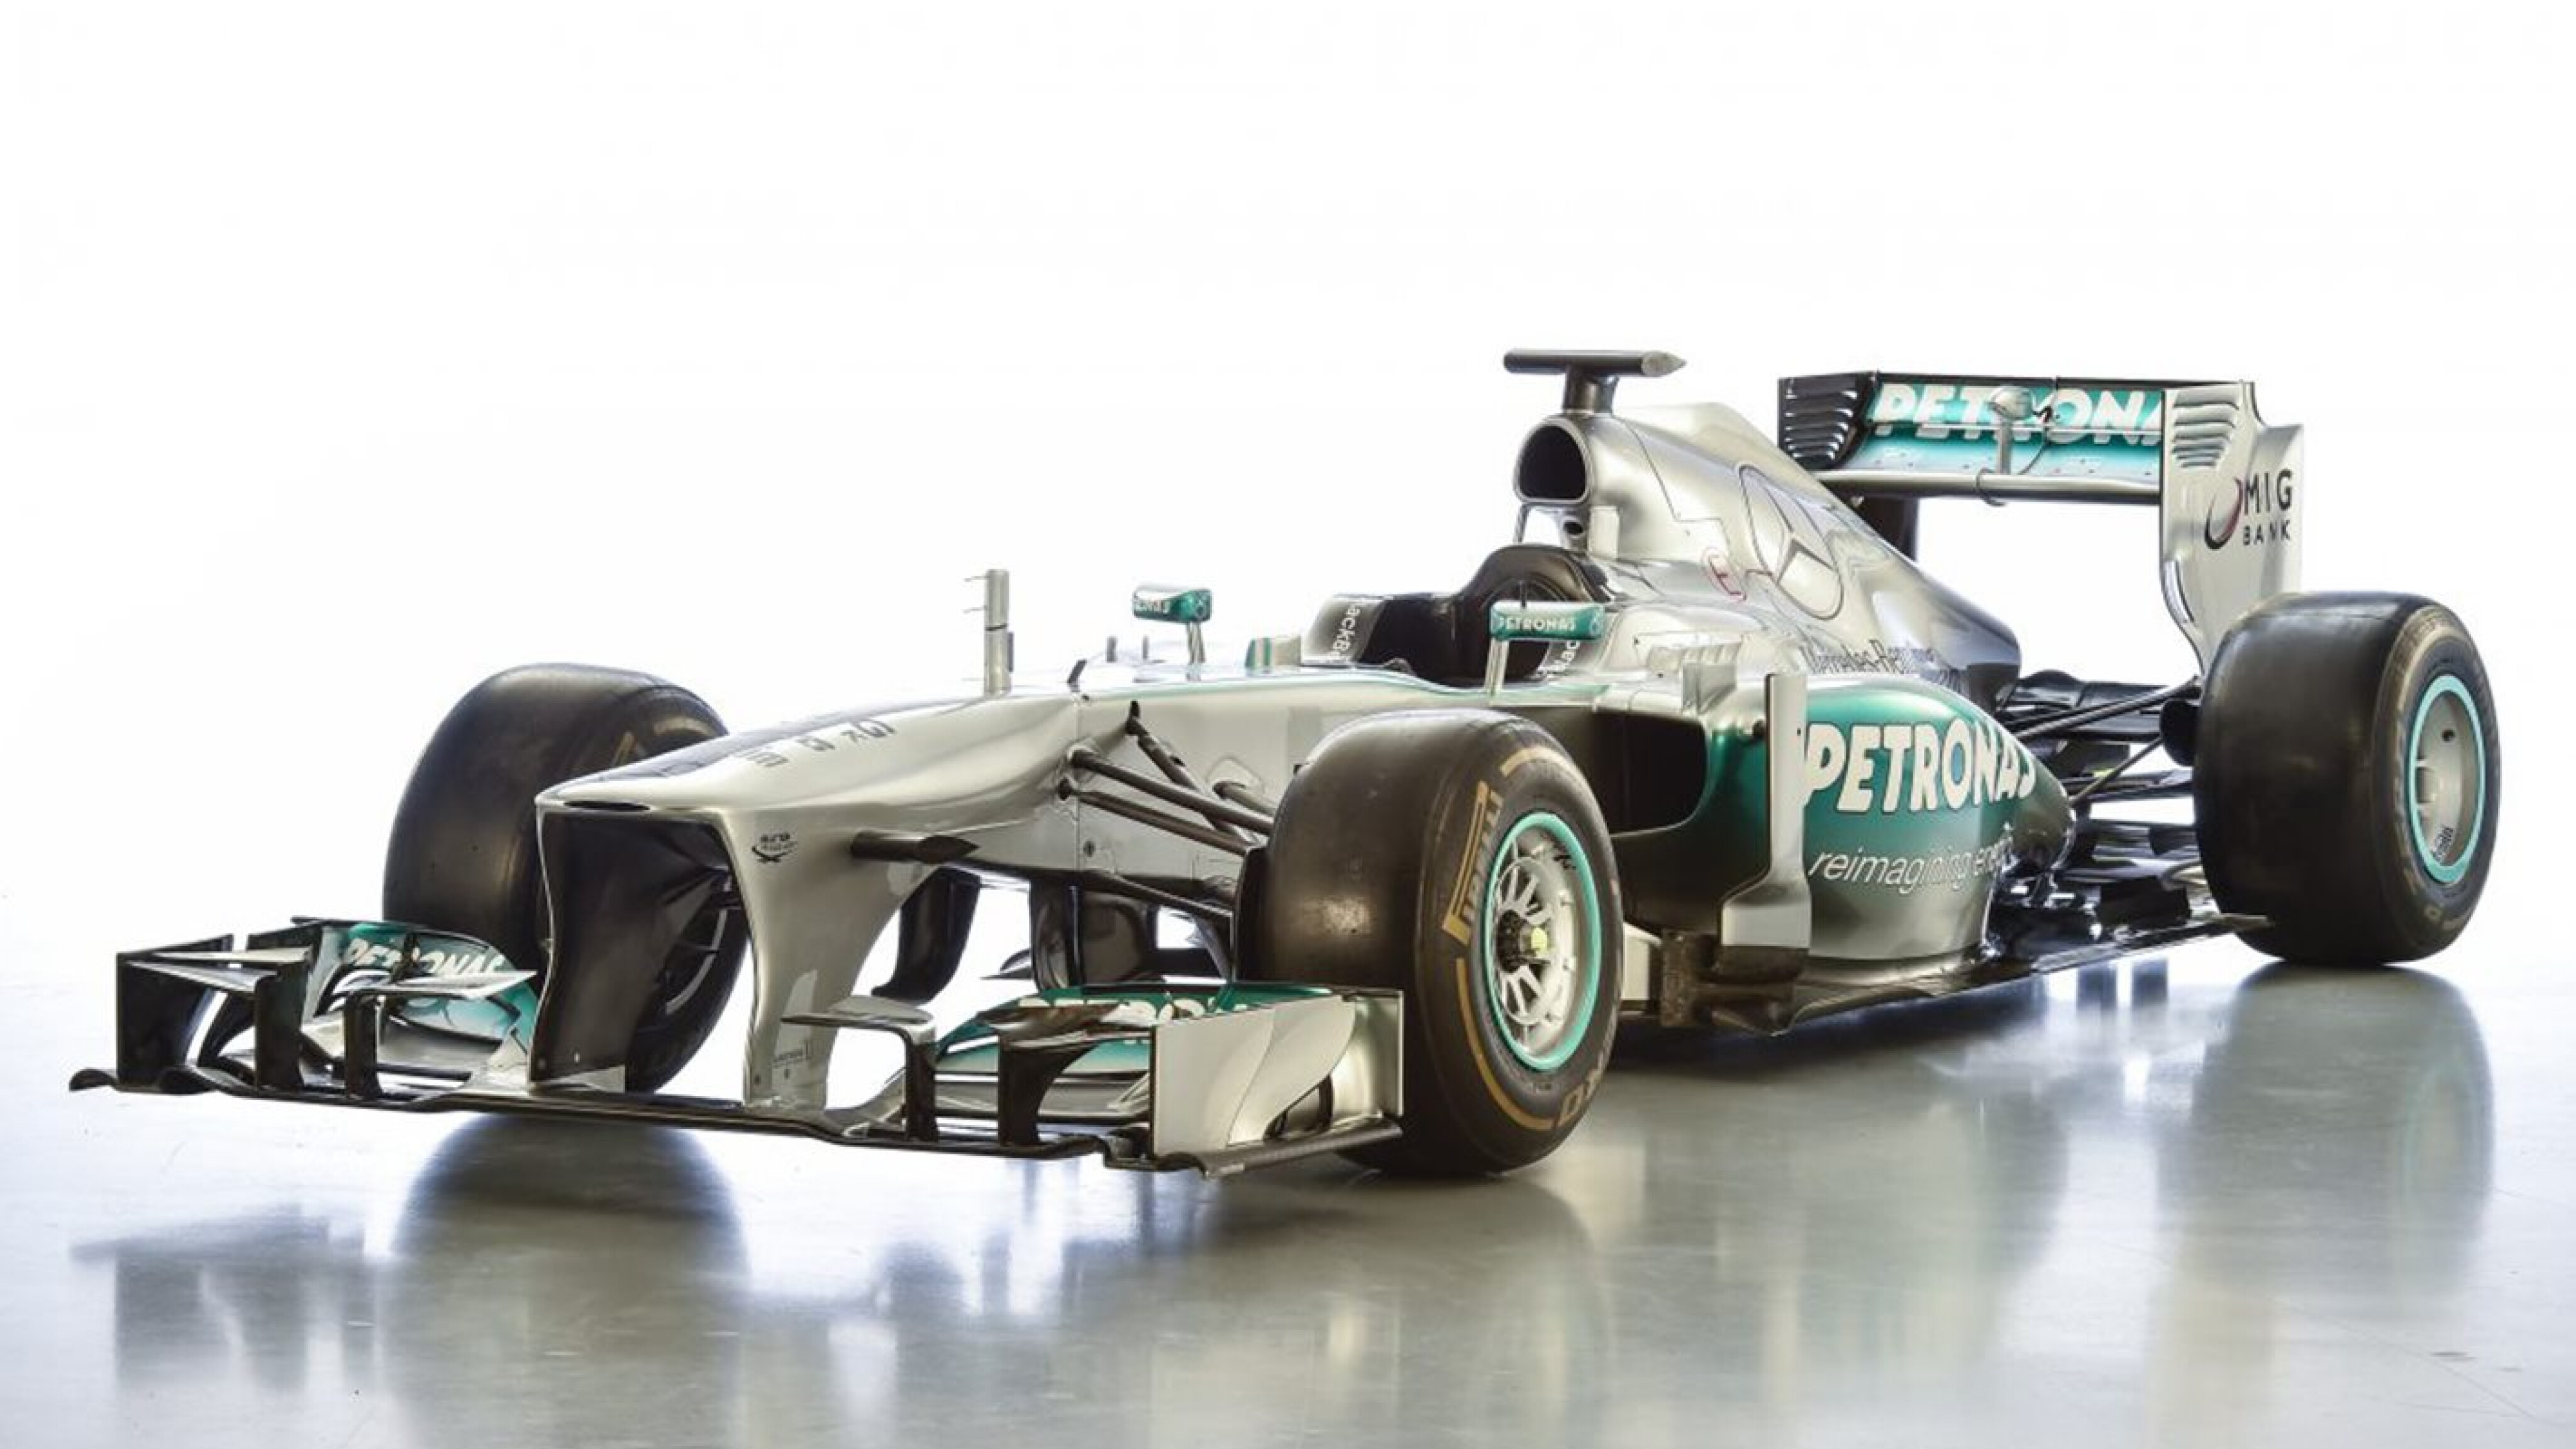 Lewis Hamilton's first race-winning Mercedes F1 car is going up